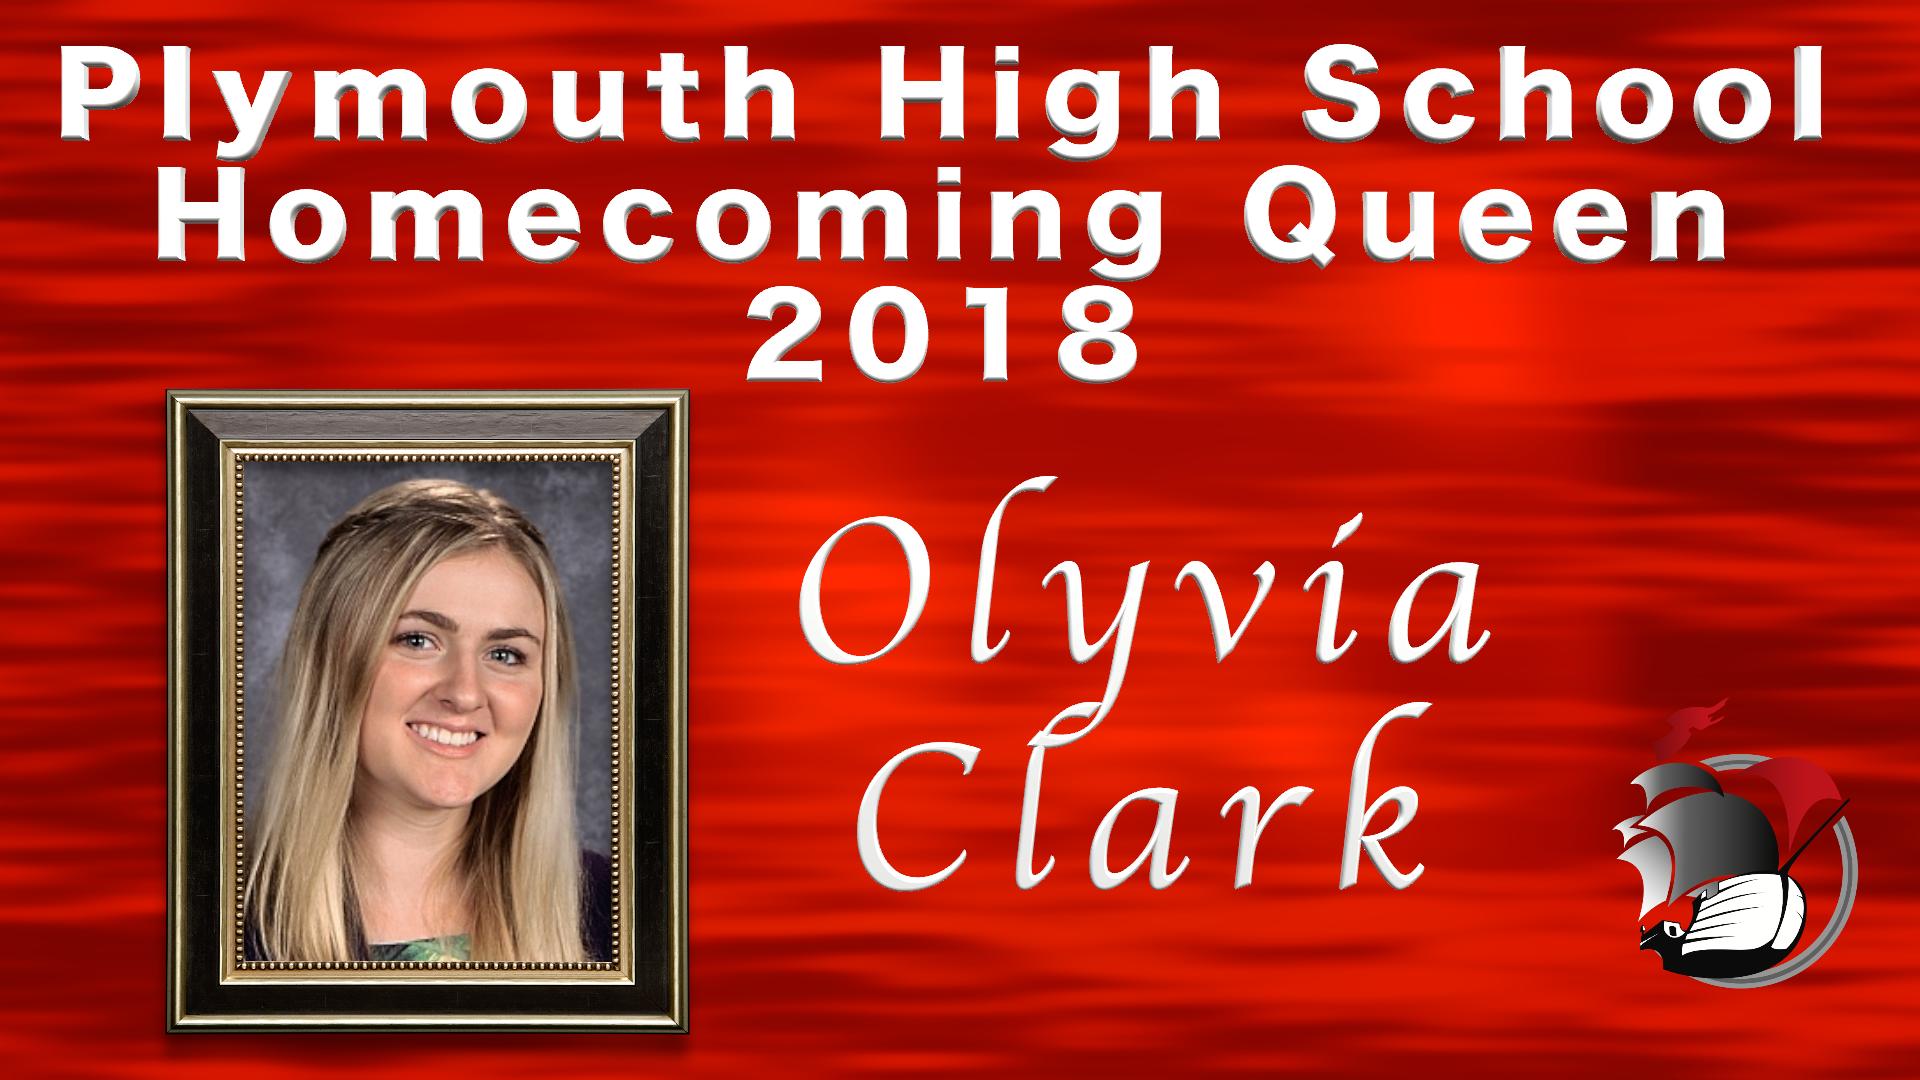 Plymouth High School Homecoming Queen 2018 Olyvia Clark on red background with picture of her